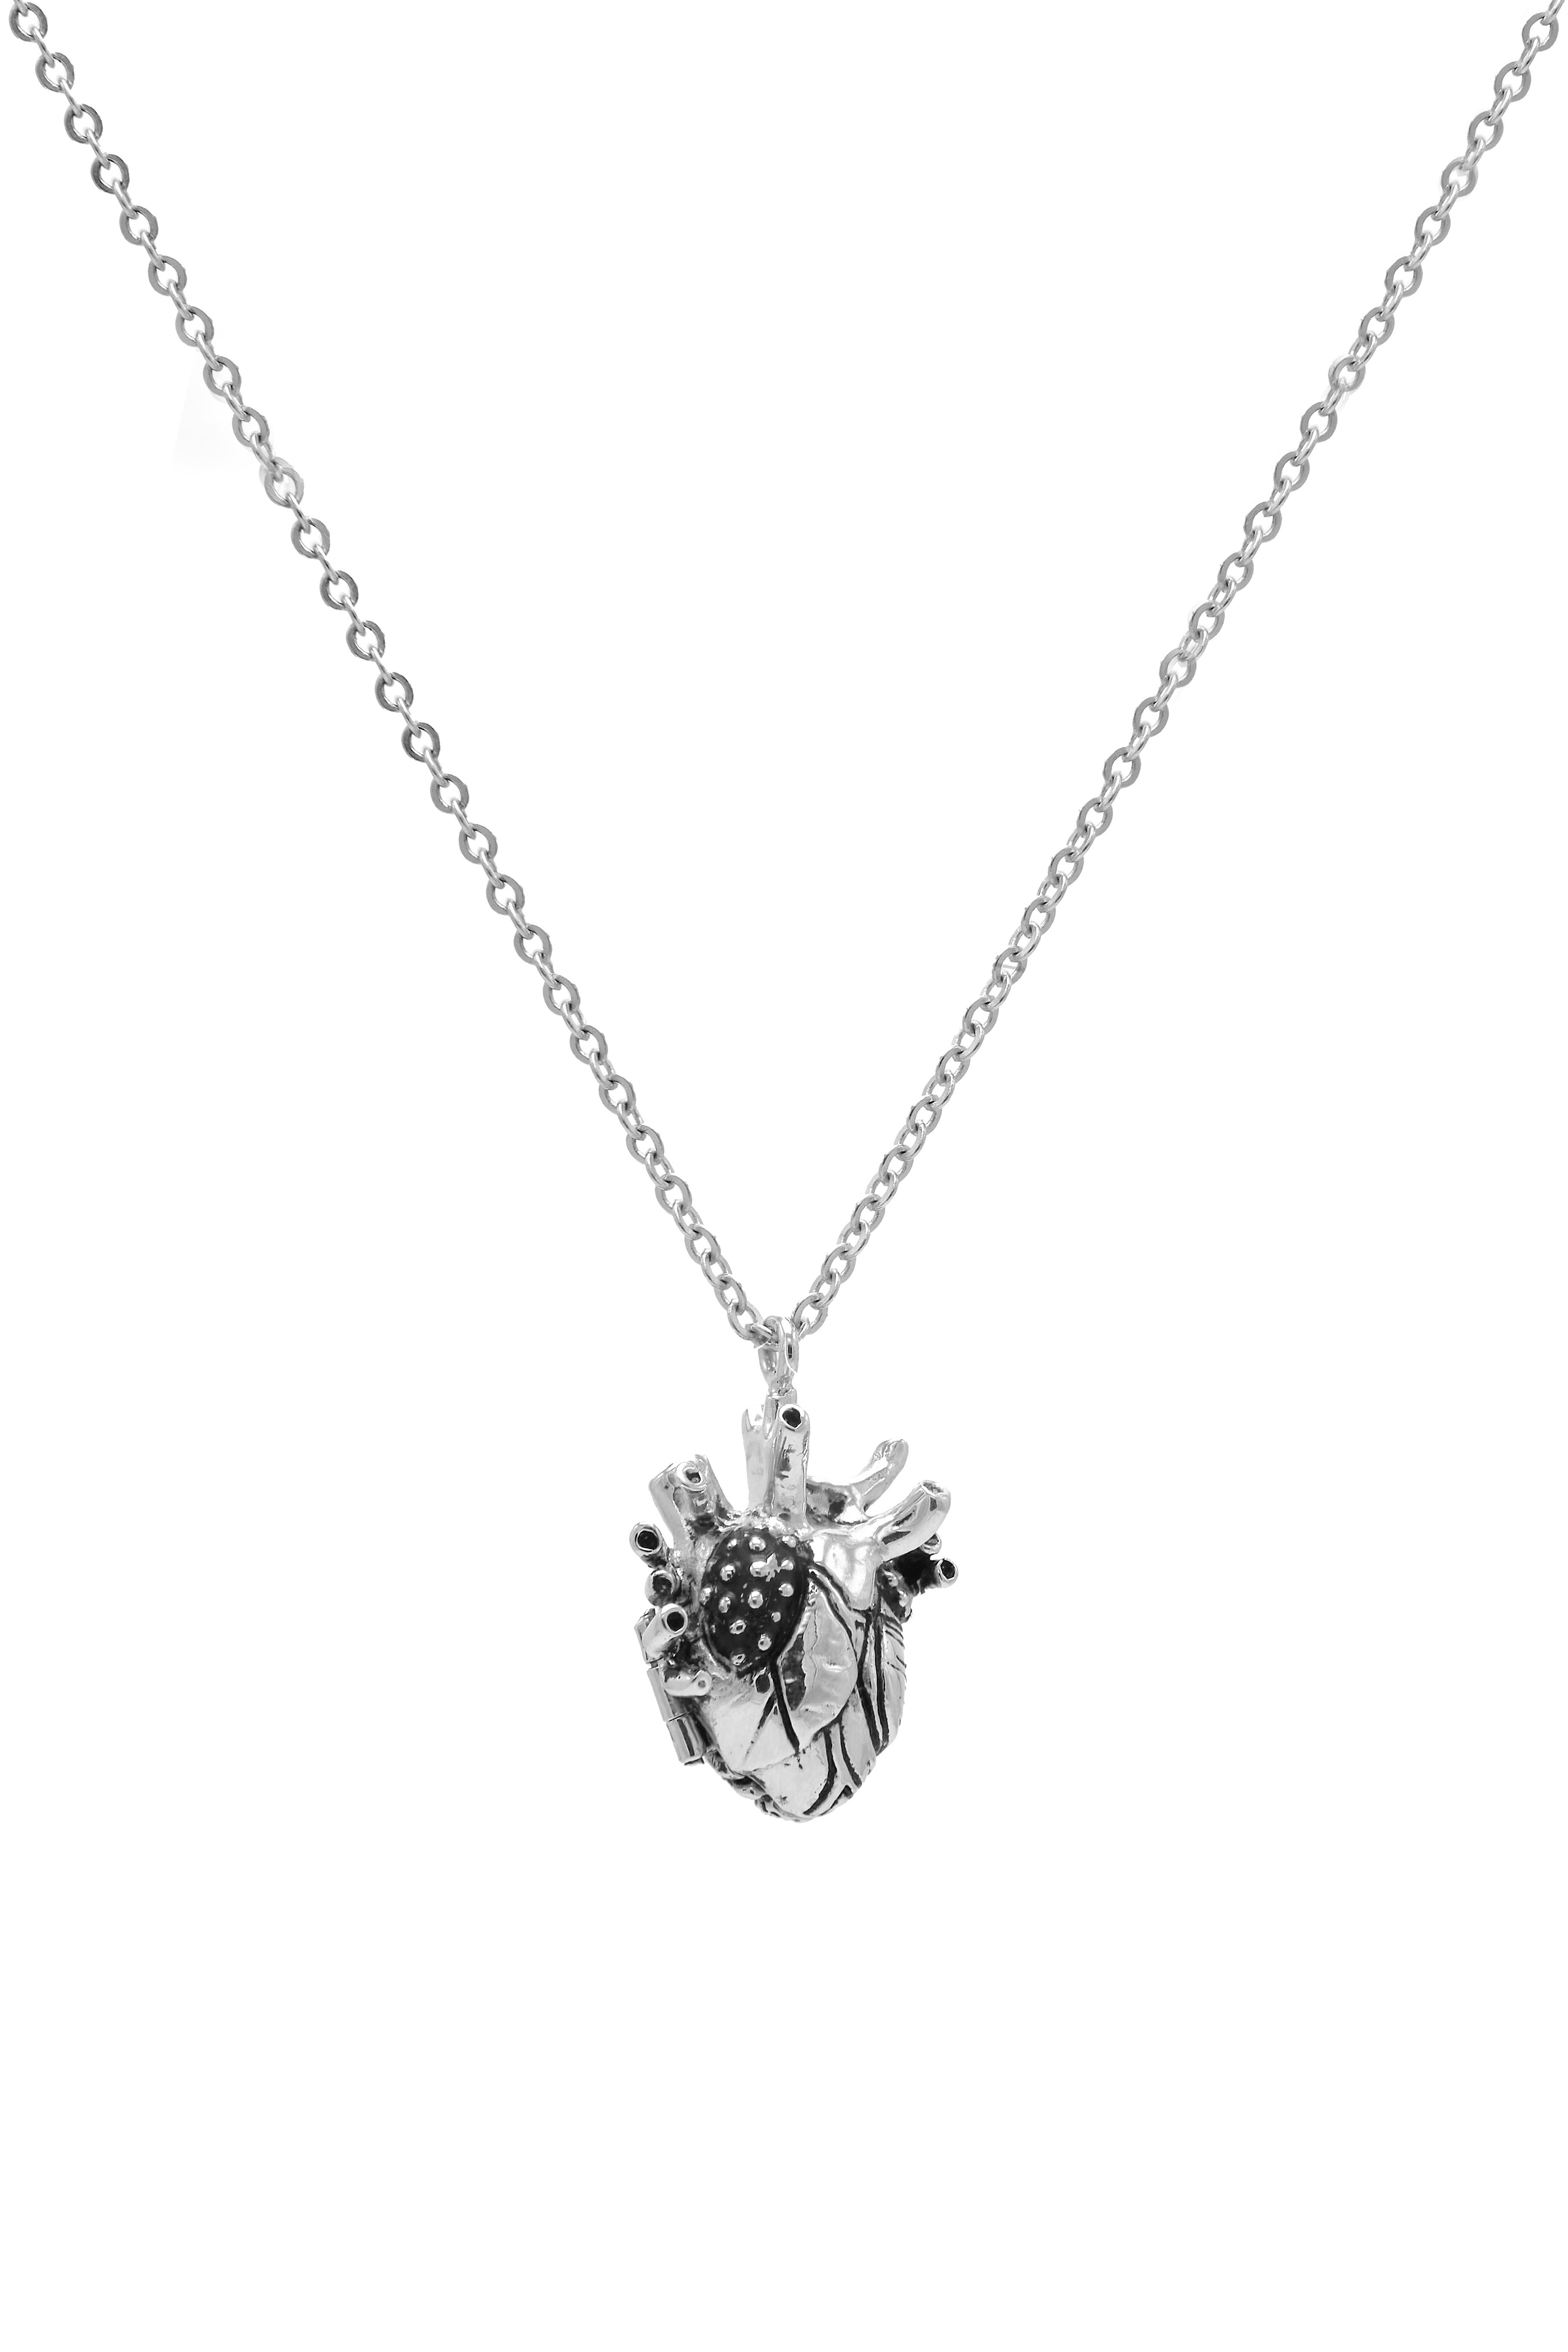 Necklace Locket Heart And Brain Small